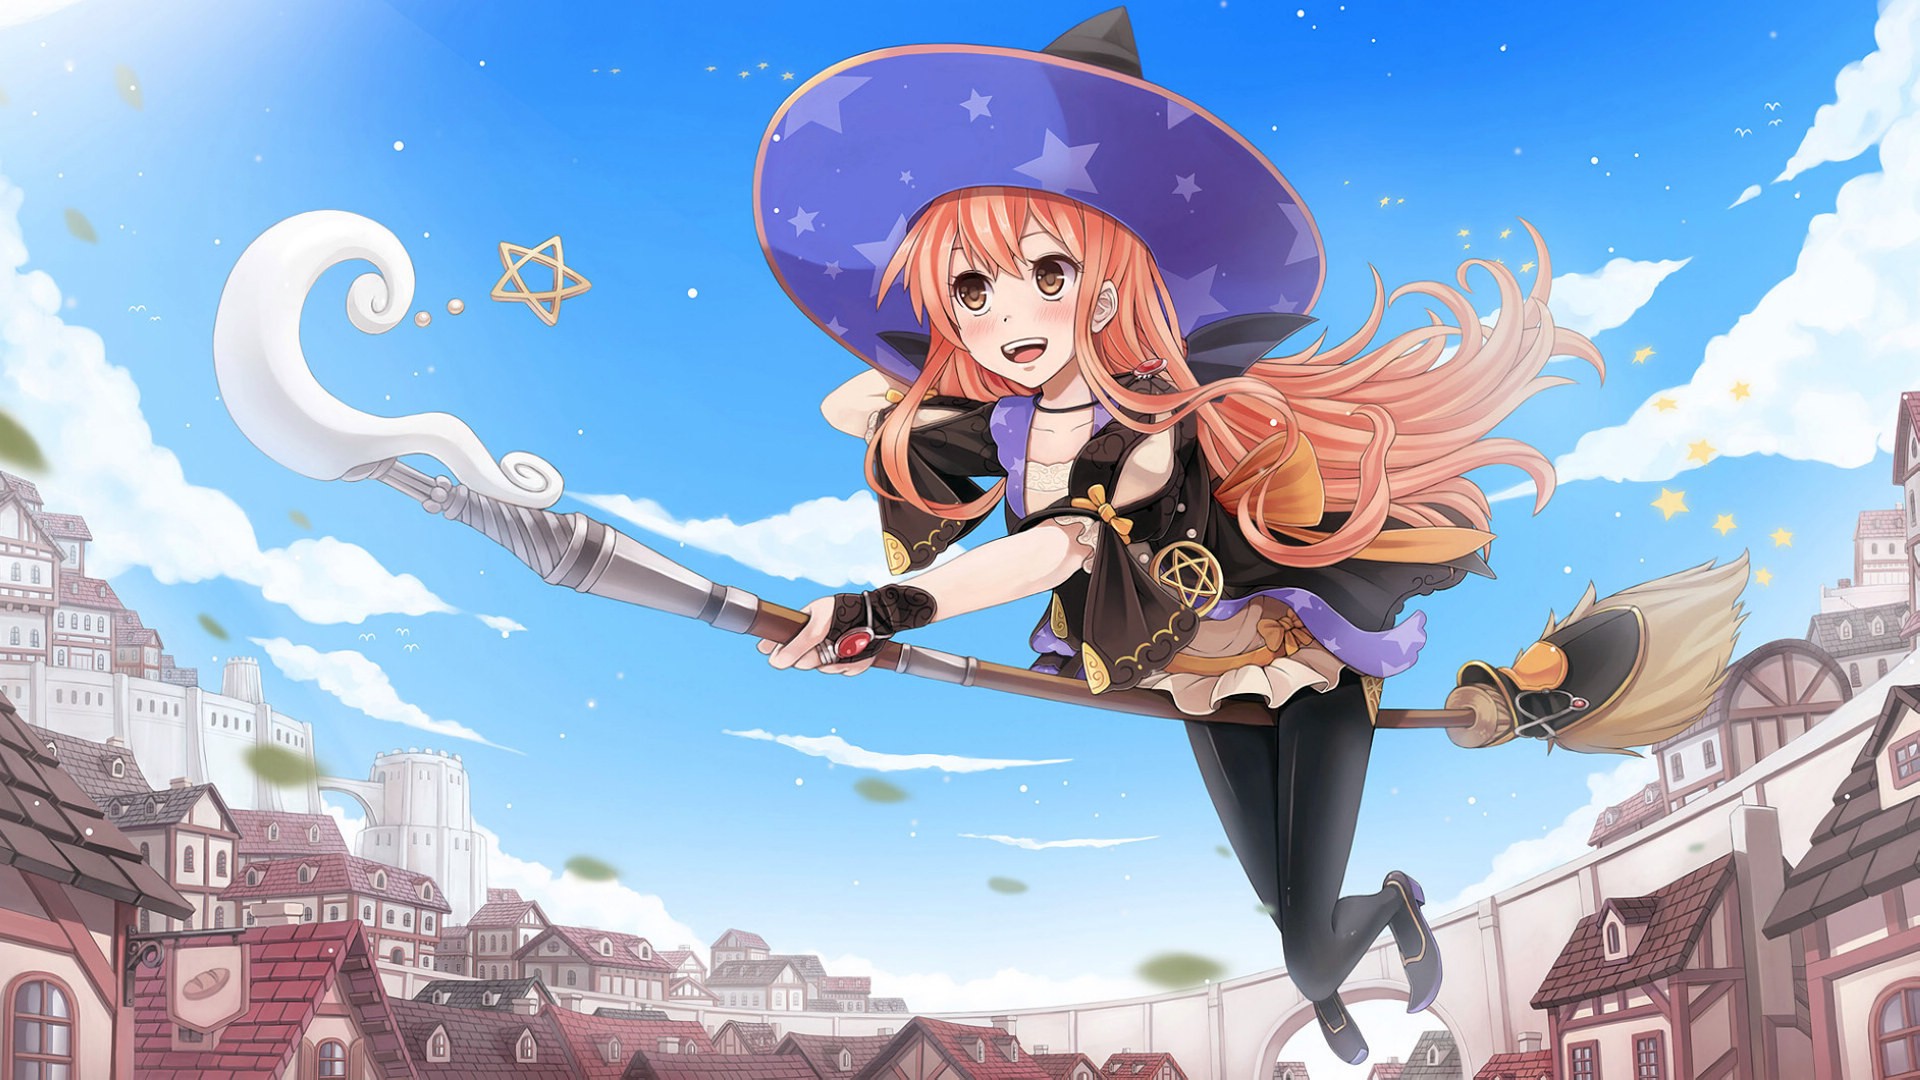 Anime 1920x1080 witch anime girls anime witch hat long hair fantasy art fantasy girl broom flying fantasy city sky brown eyes open mouth redhead